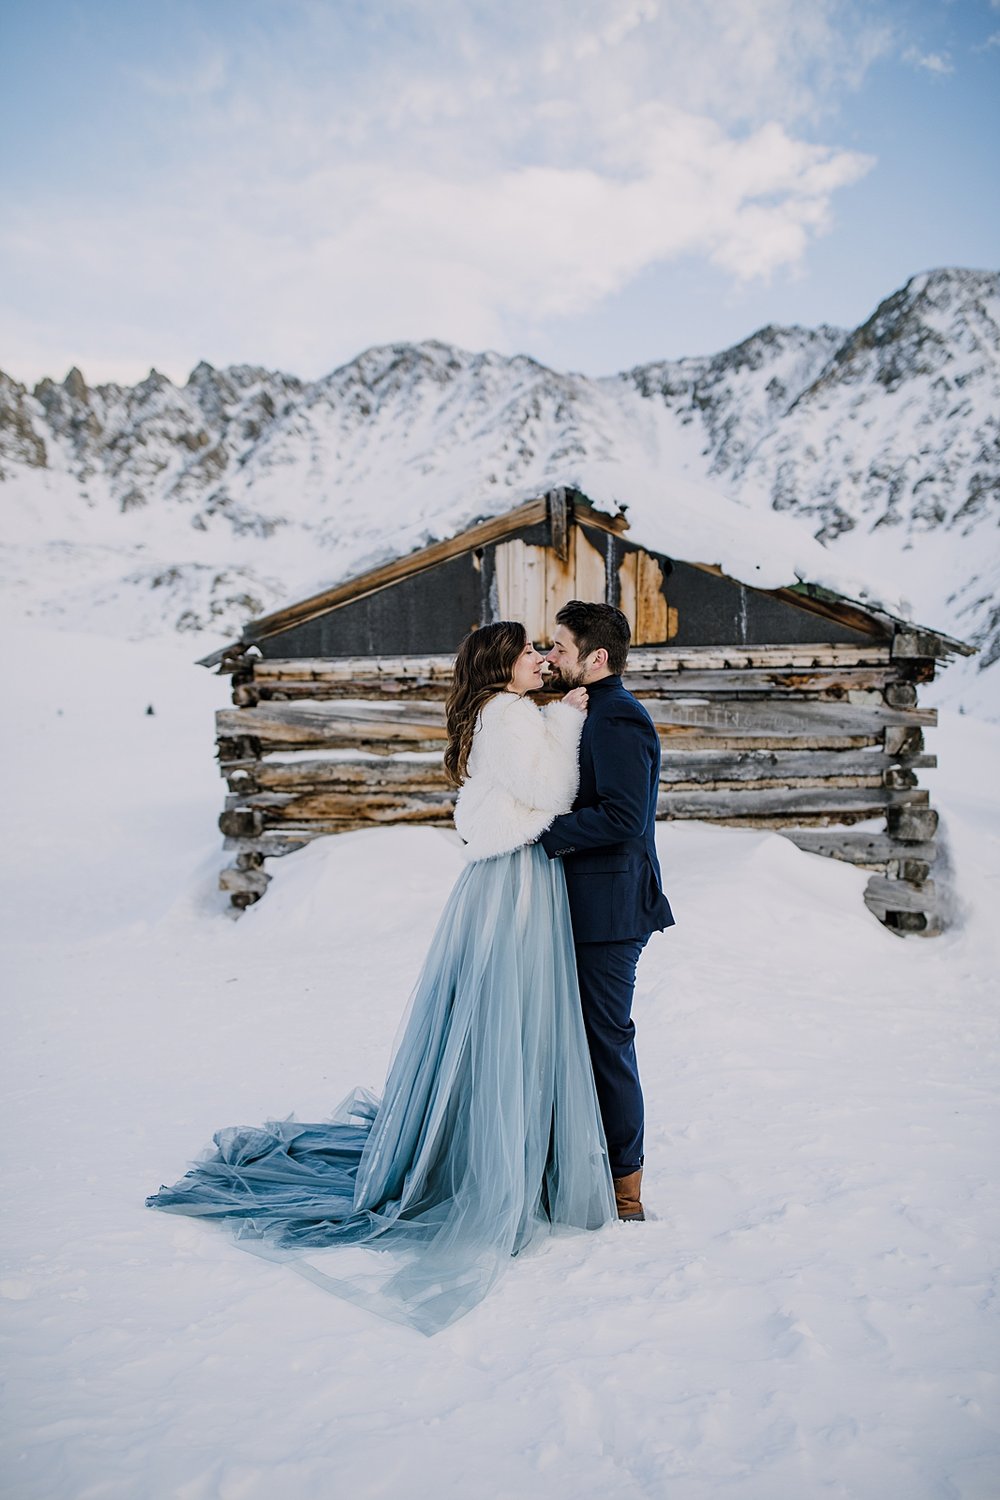 Couple snuggling in front of cabin, bride and groom snuggle in the mountains, snowy snowshoe adventure, snowy snowshoe elopement, kiss in front of cabin, winter wedding bridal jacket